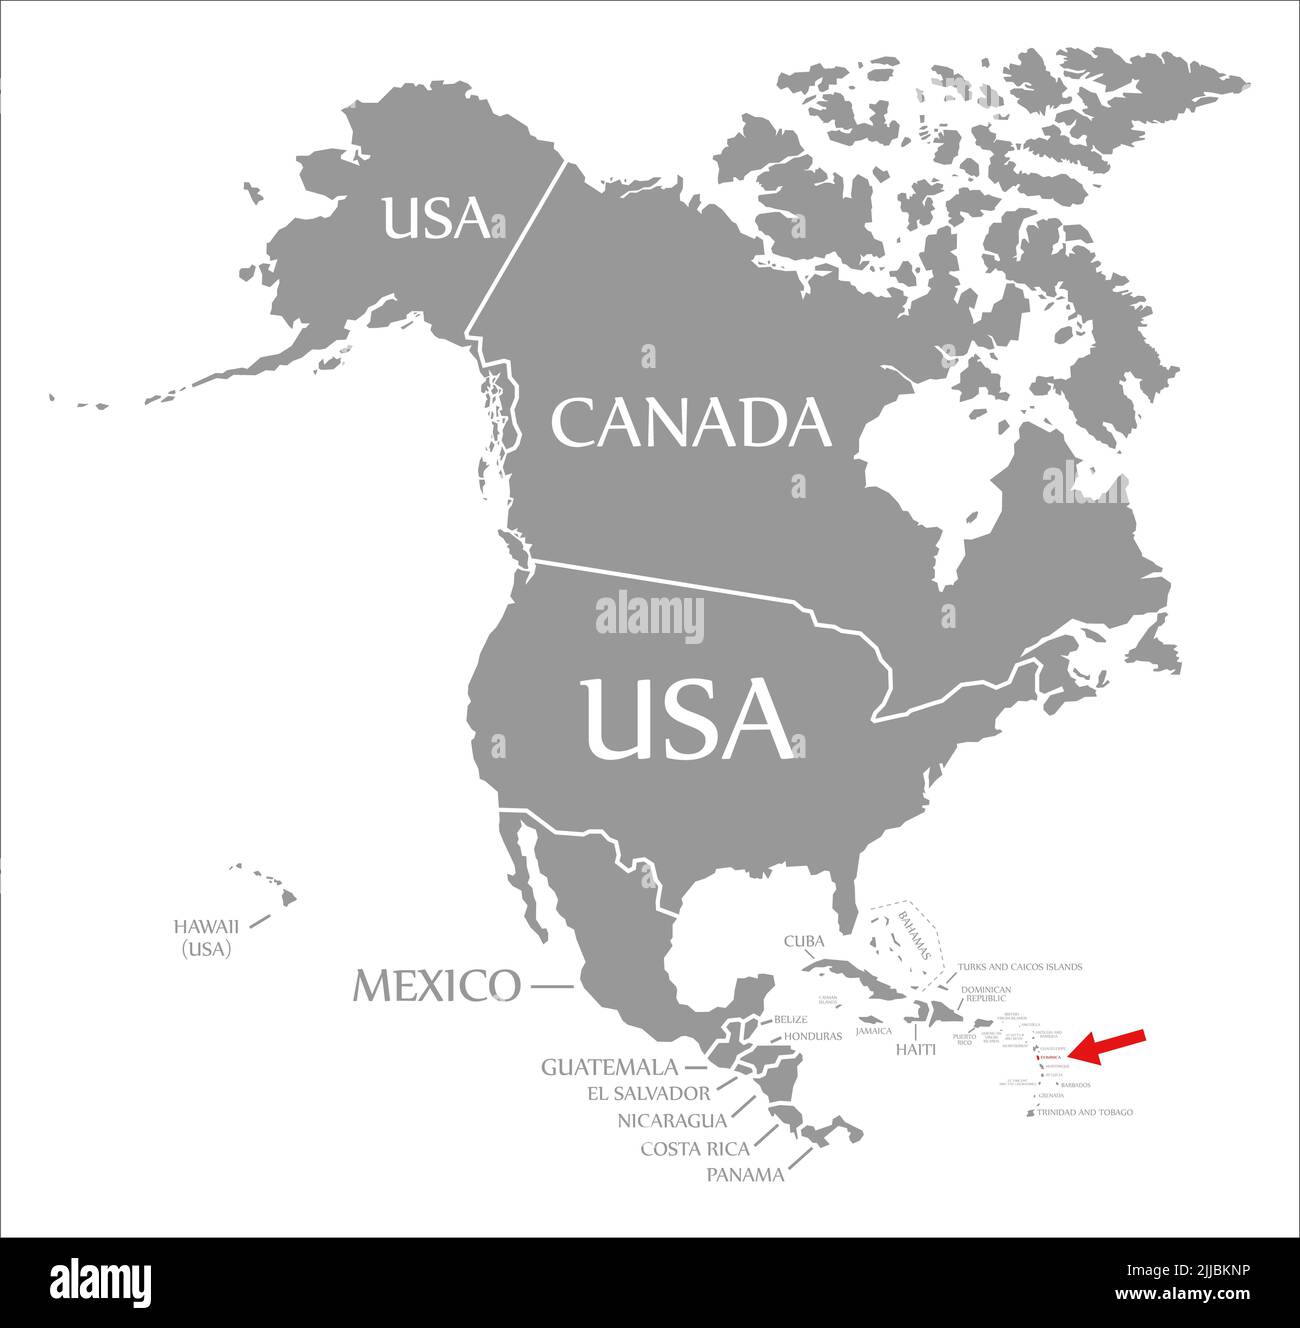 Dominica red highlighted in map of North America Stock Photo